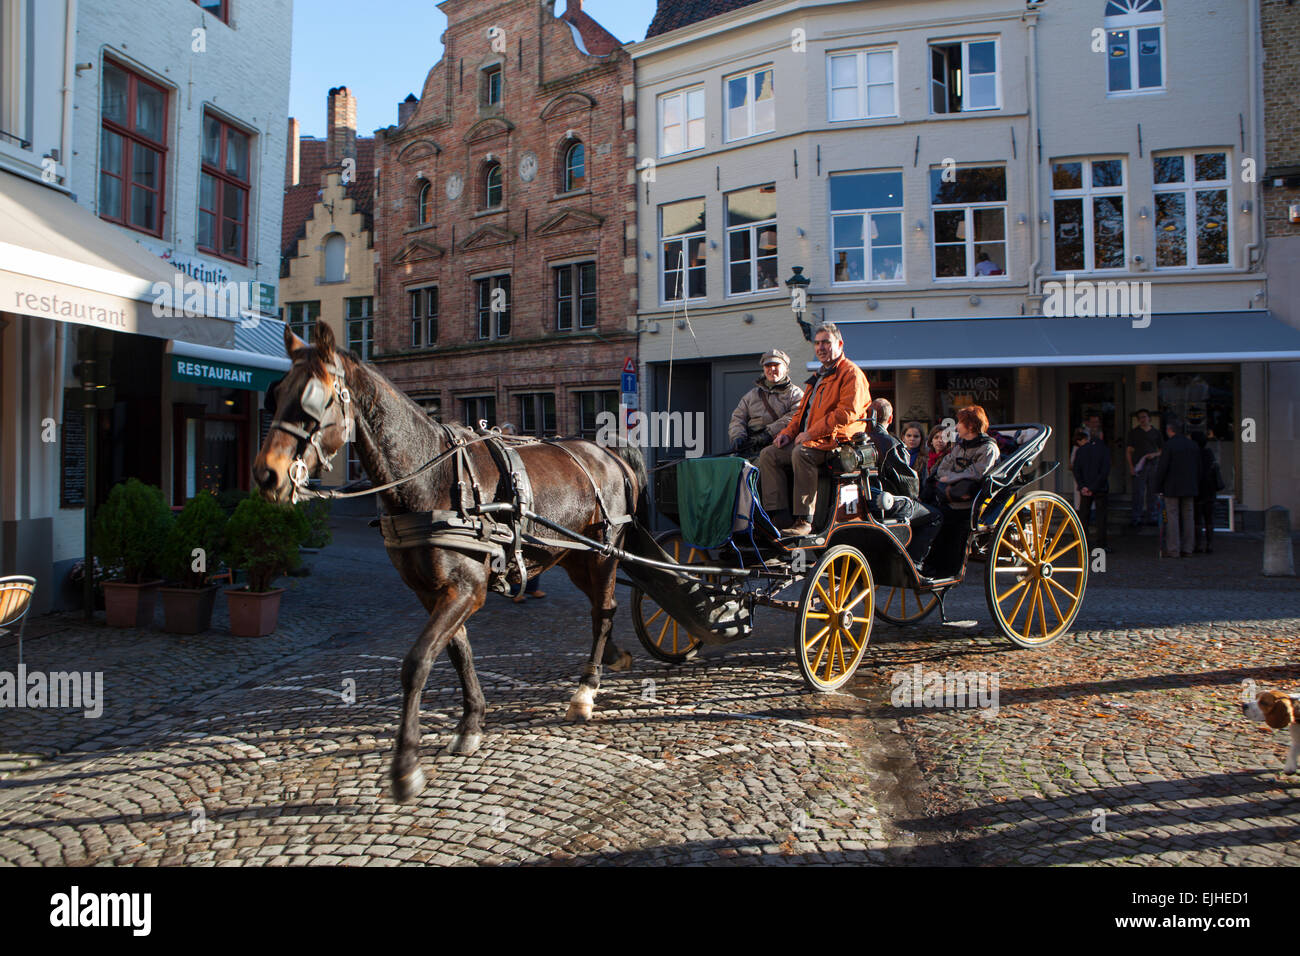 Horse and carriage tour of Bruges, Belgium historic district Stock Photo